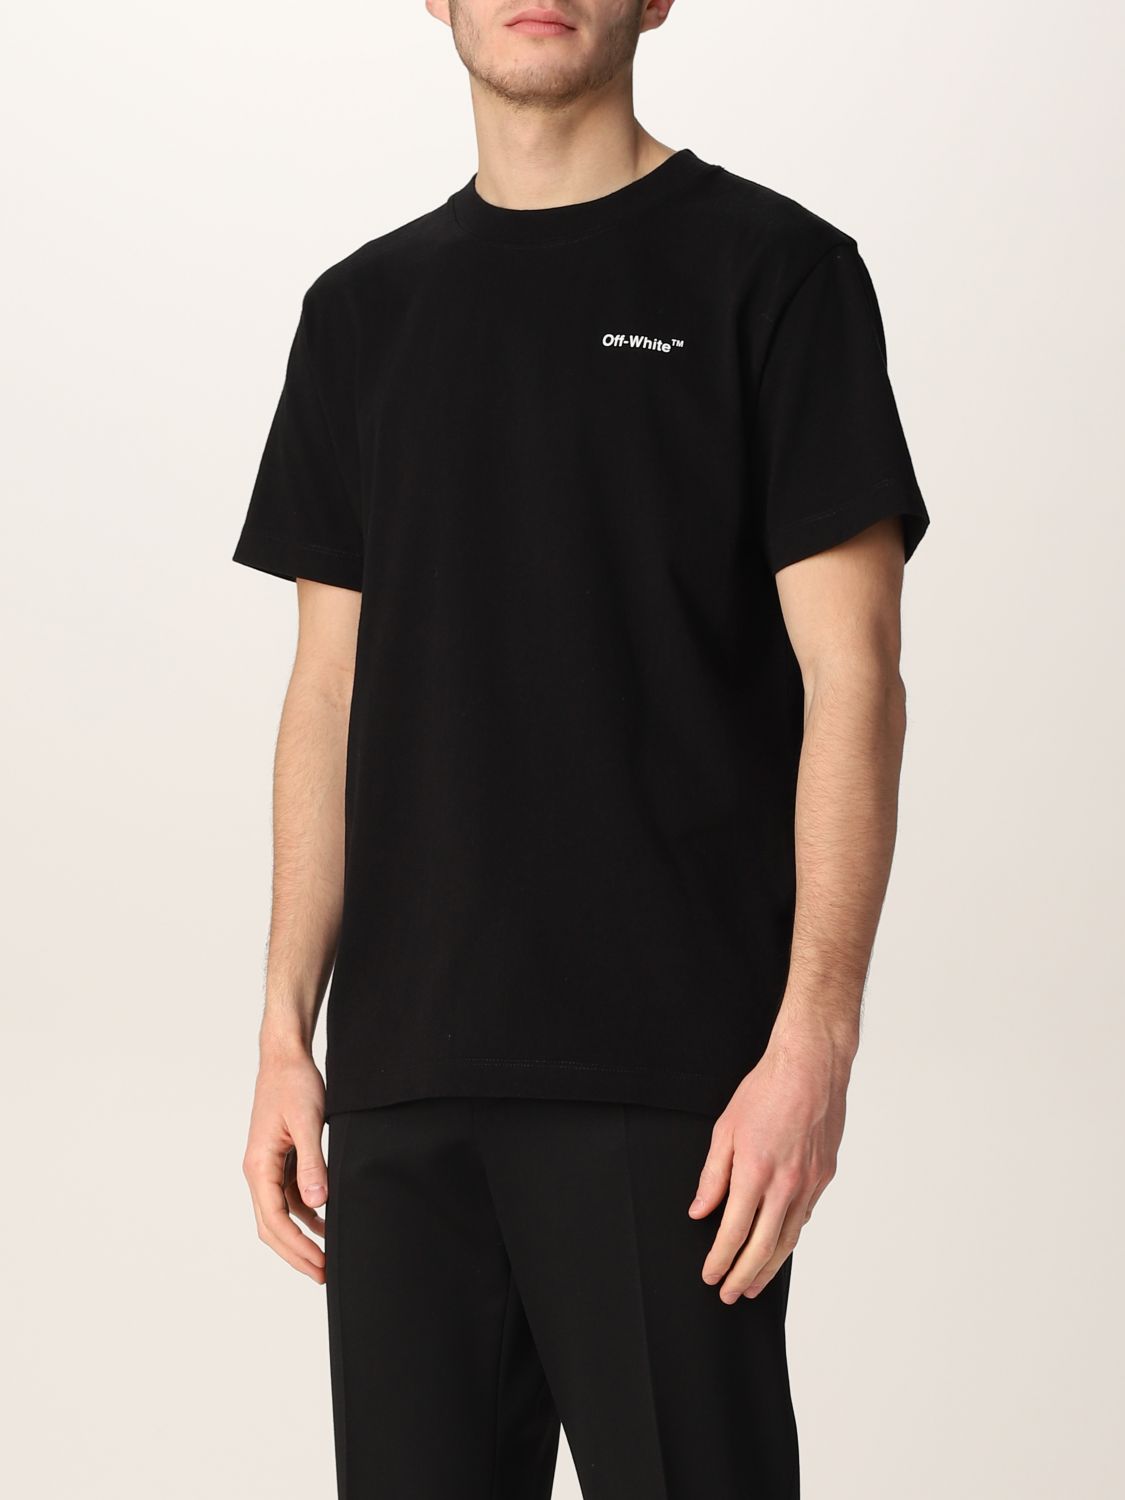 OFF-WHITE™ C/O ANDRÉ SARAIVA T-SHIRT in black